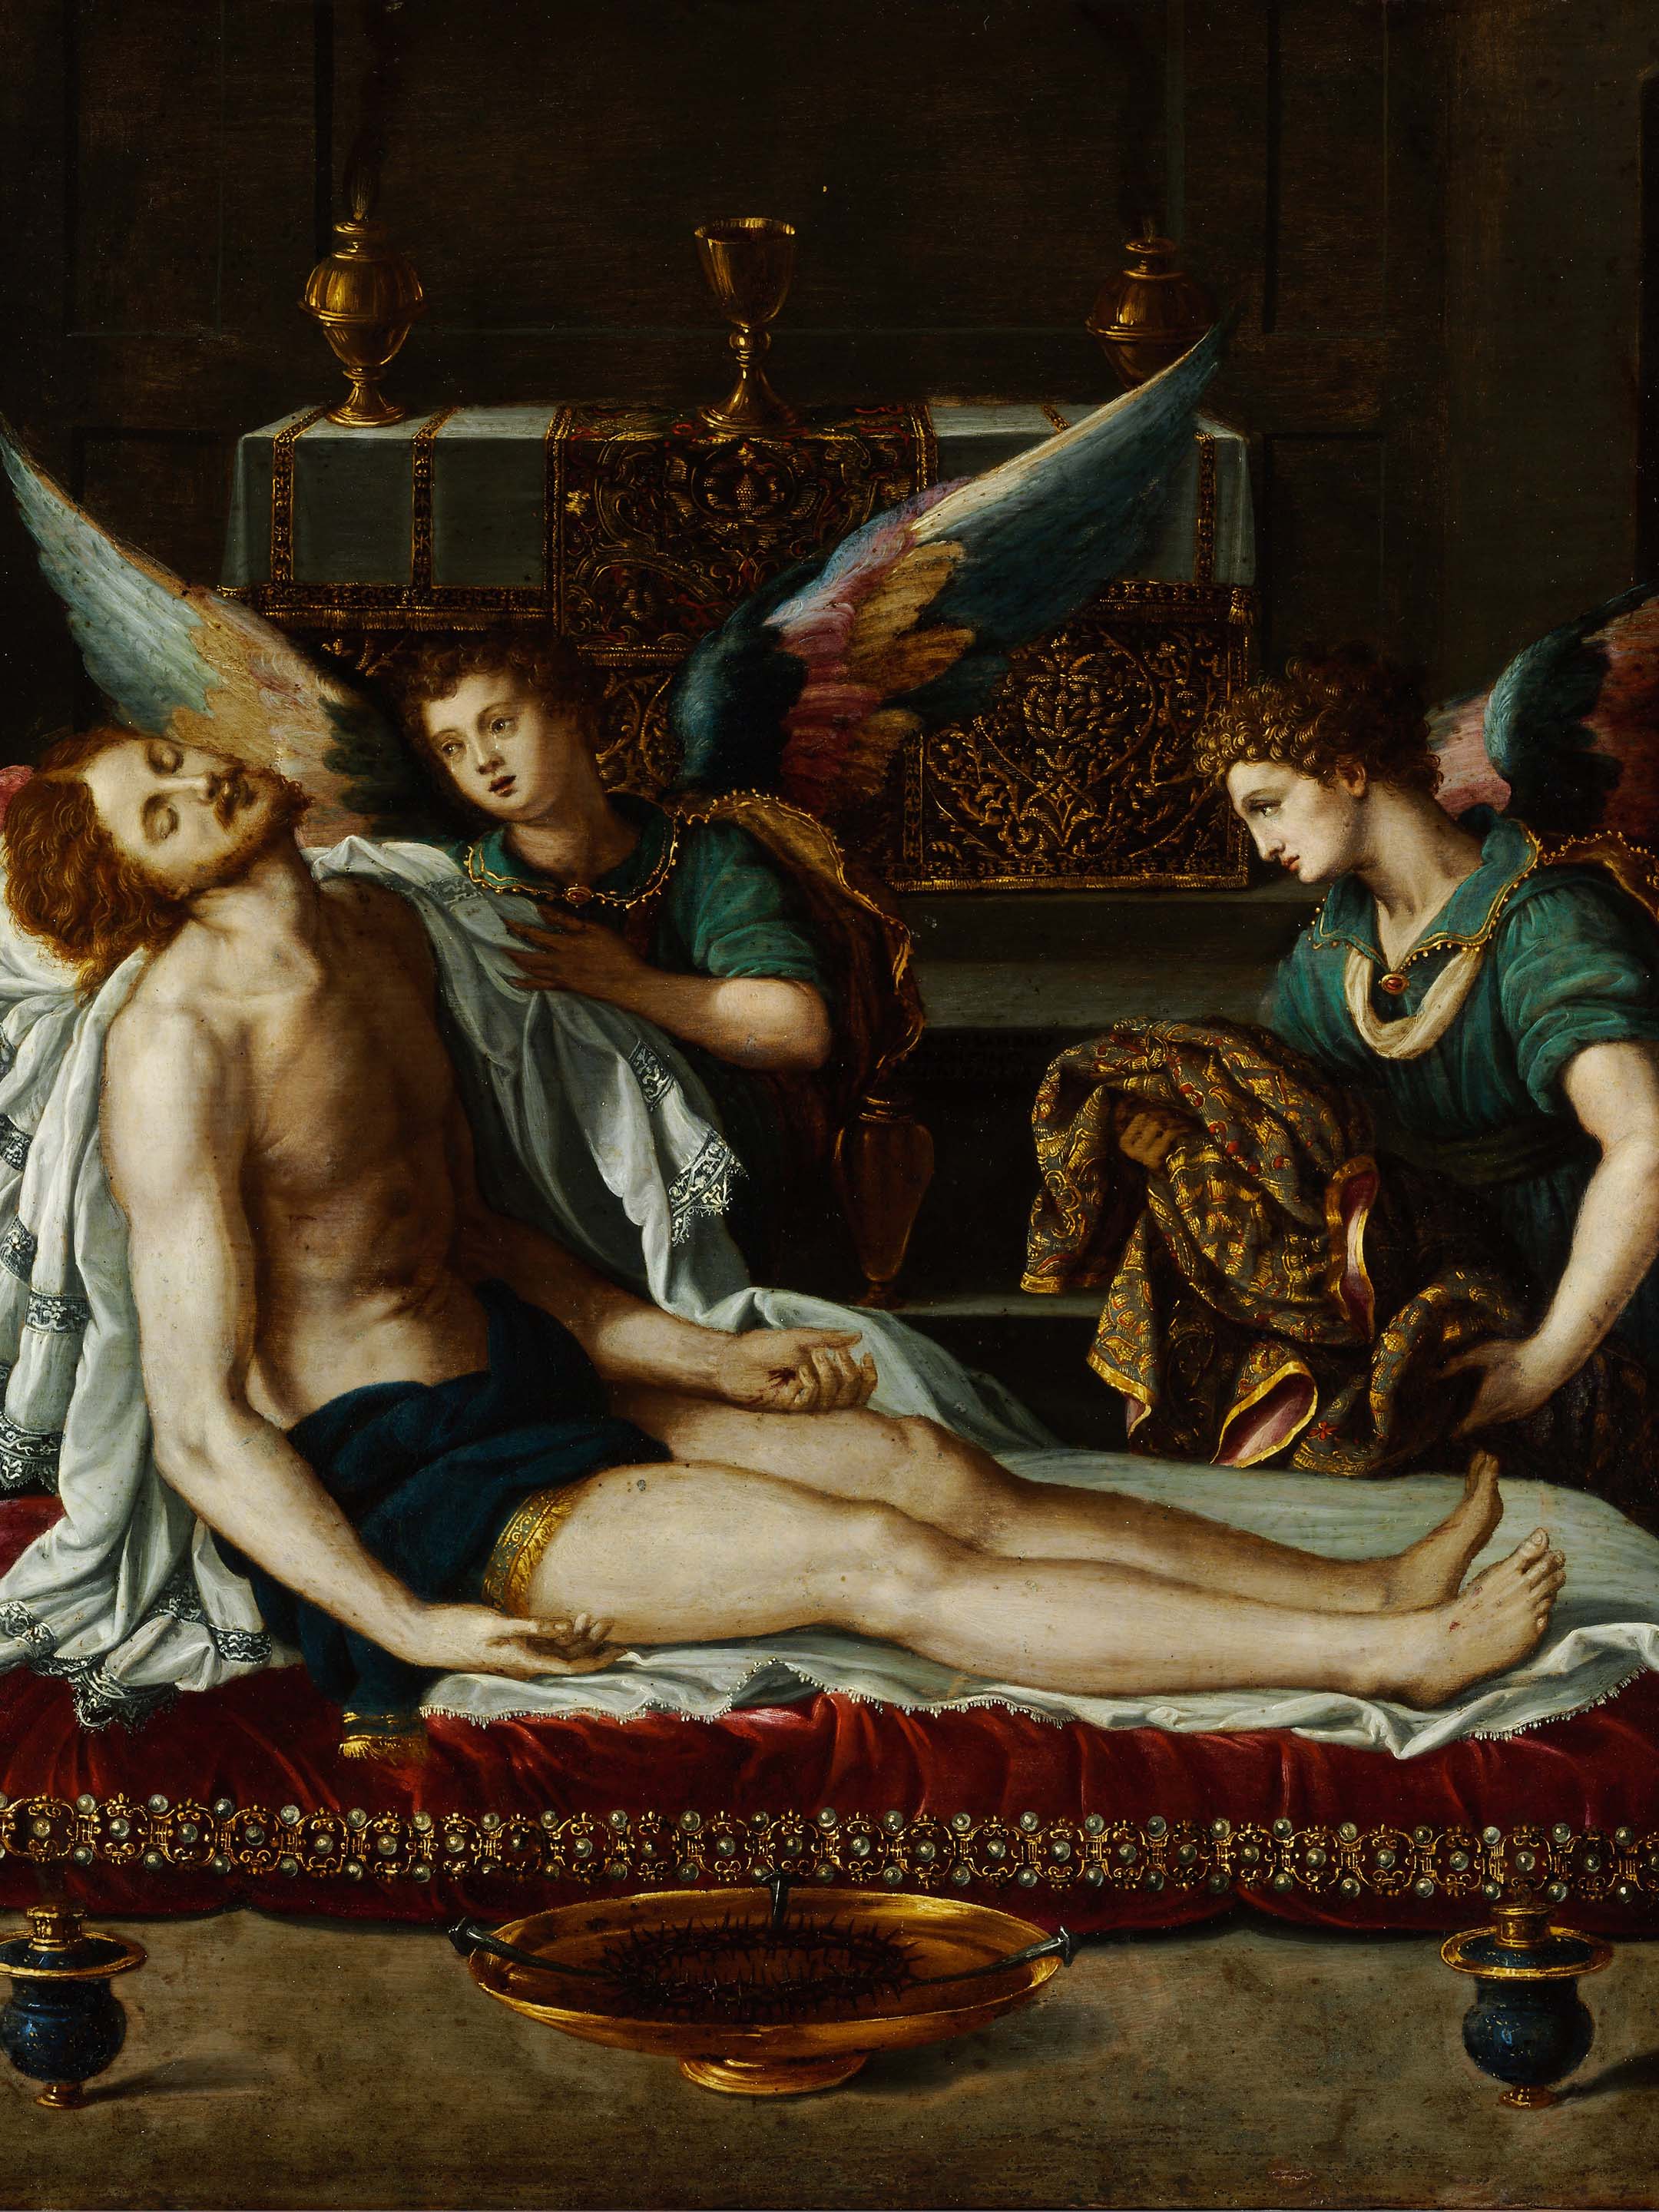 Alessandro Allori - The Body of Christ Anointed by Two Angels